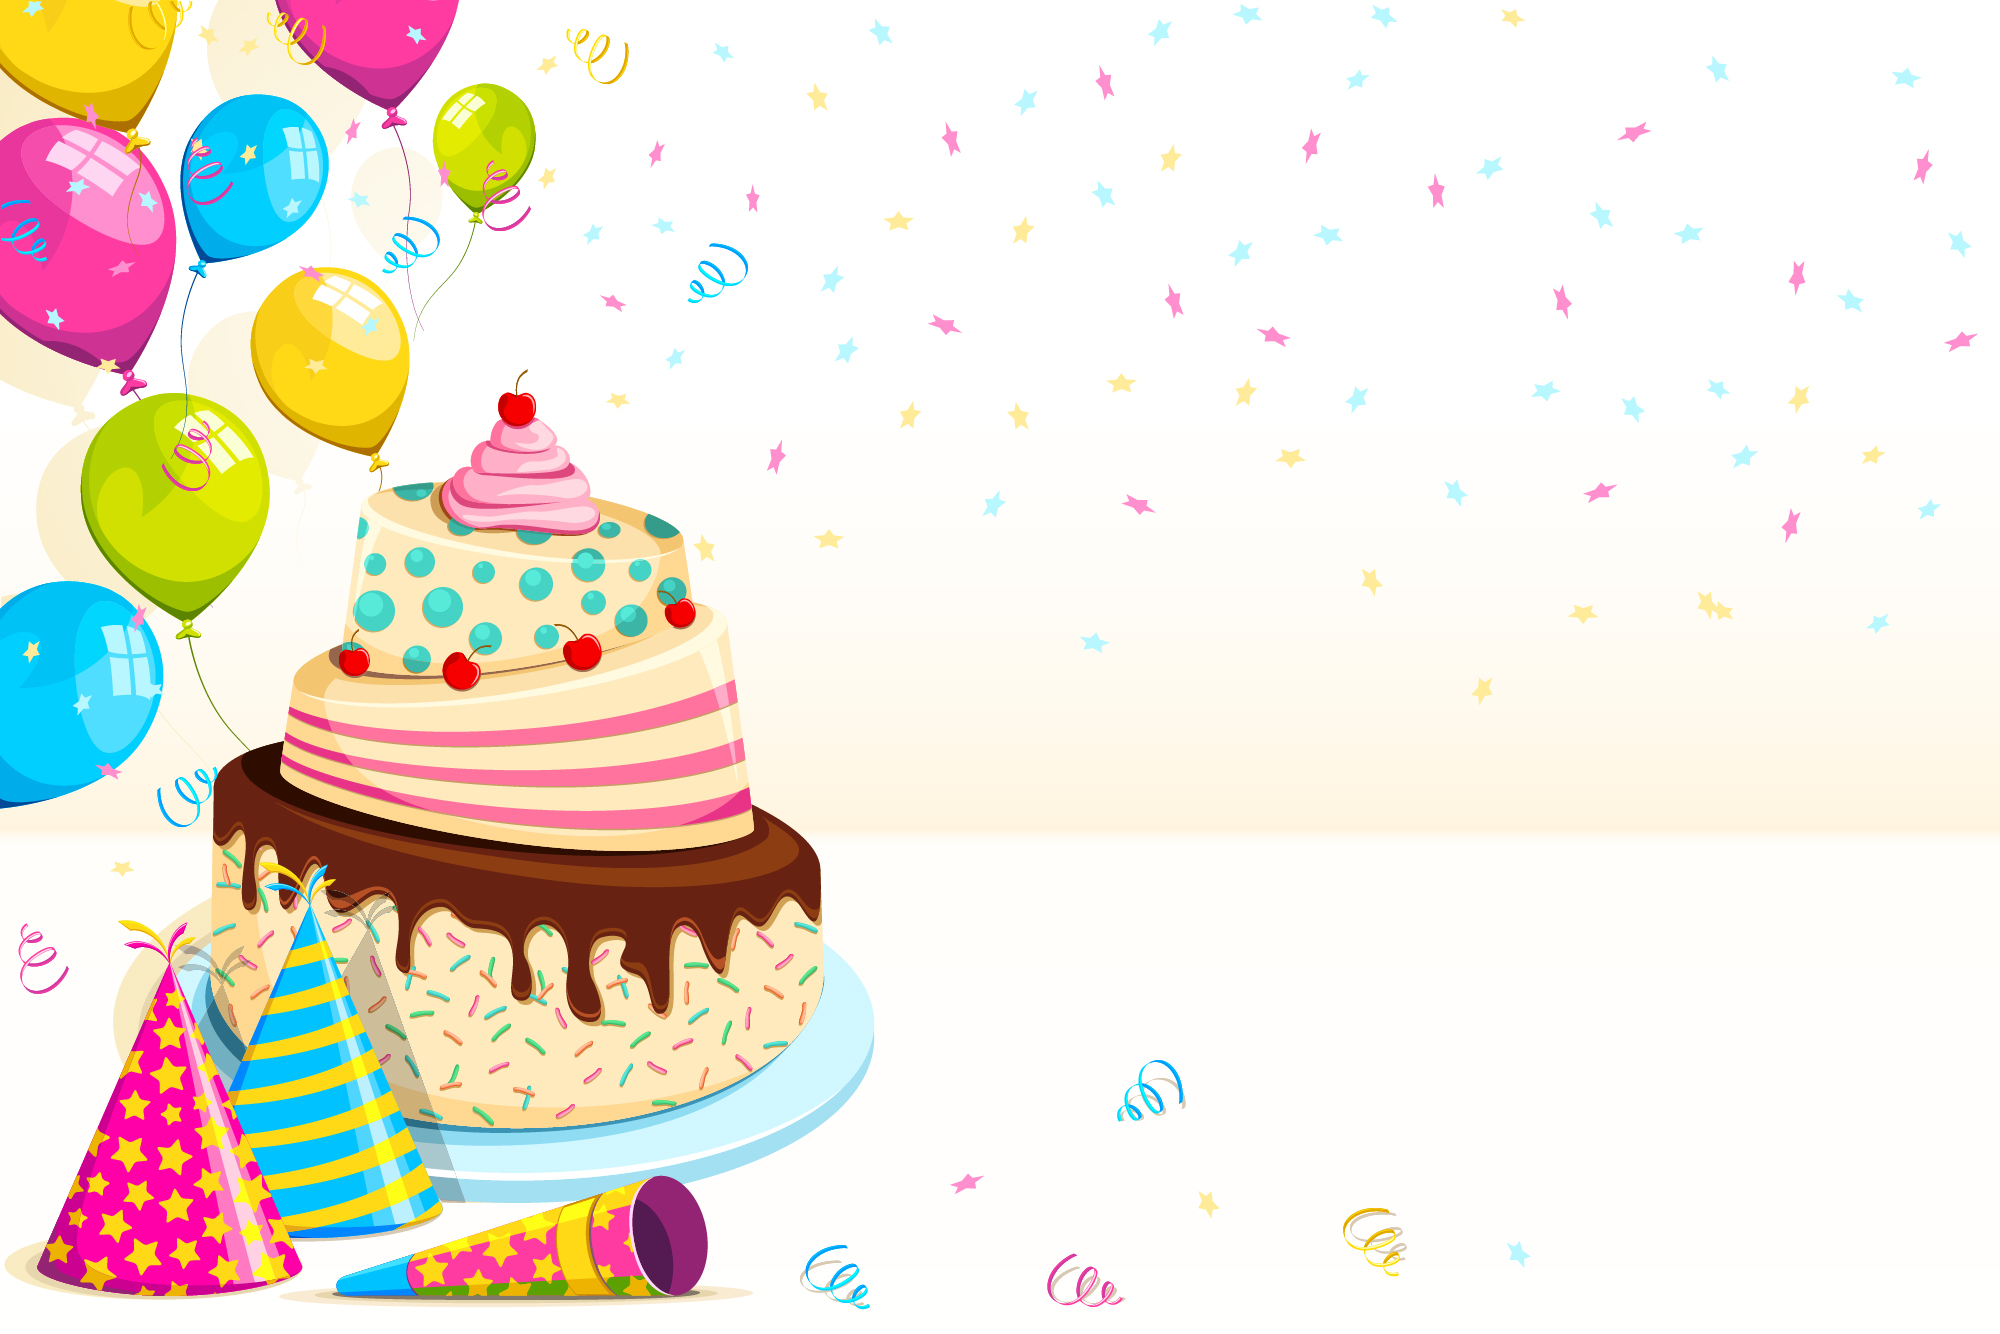 Foxdog - 25 Awesome Backgrounds for Your Zoom Birthday Party